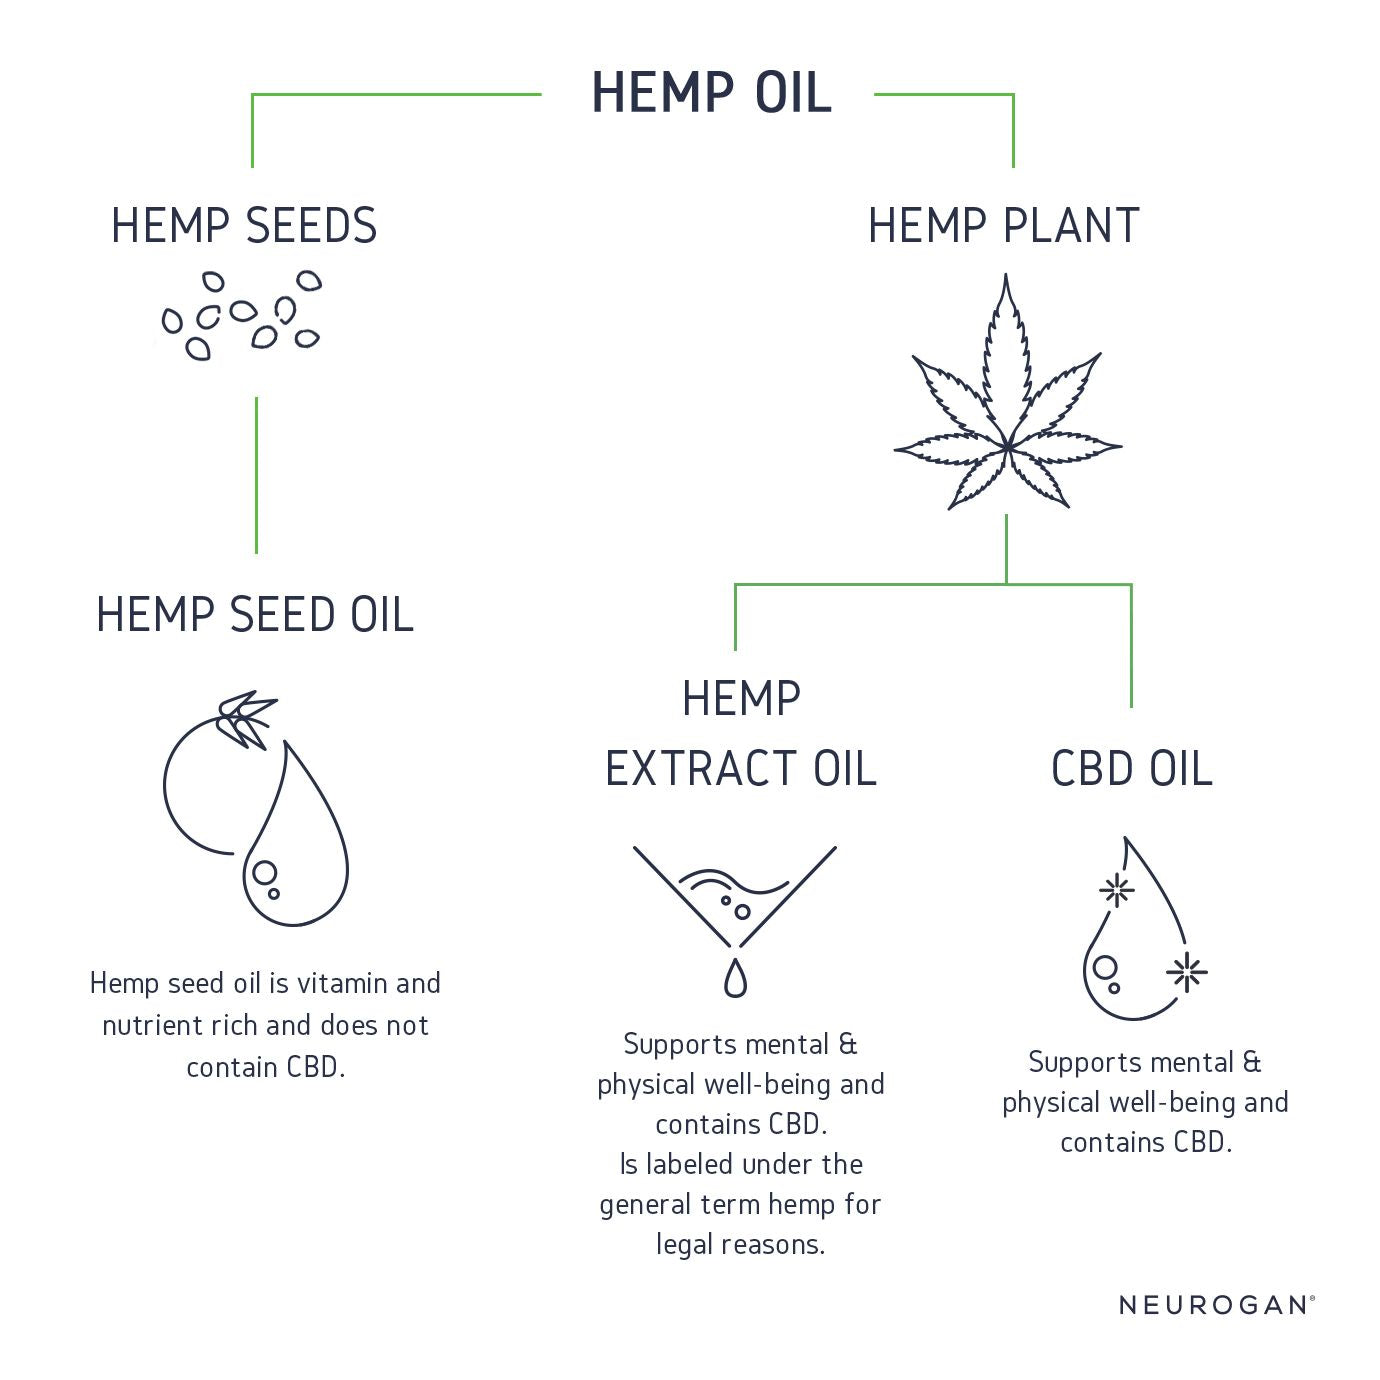 Common terms used in the hemp industry